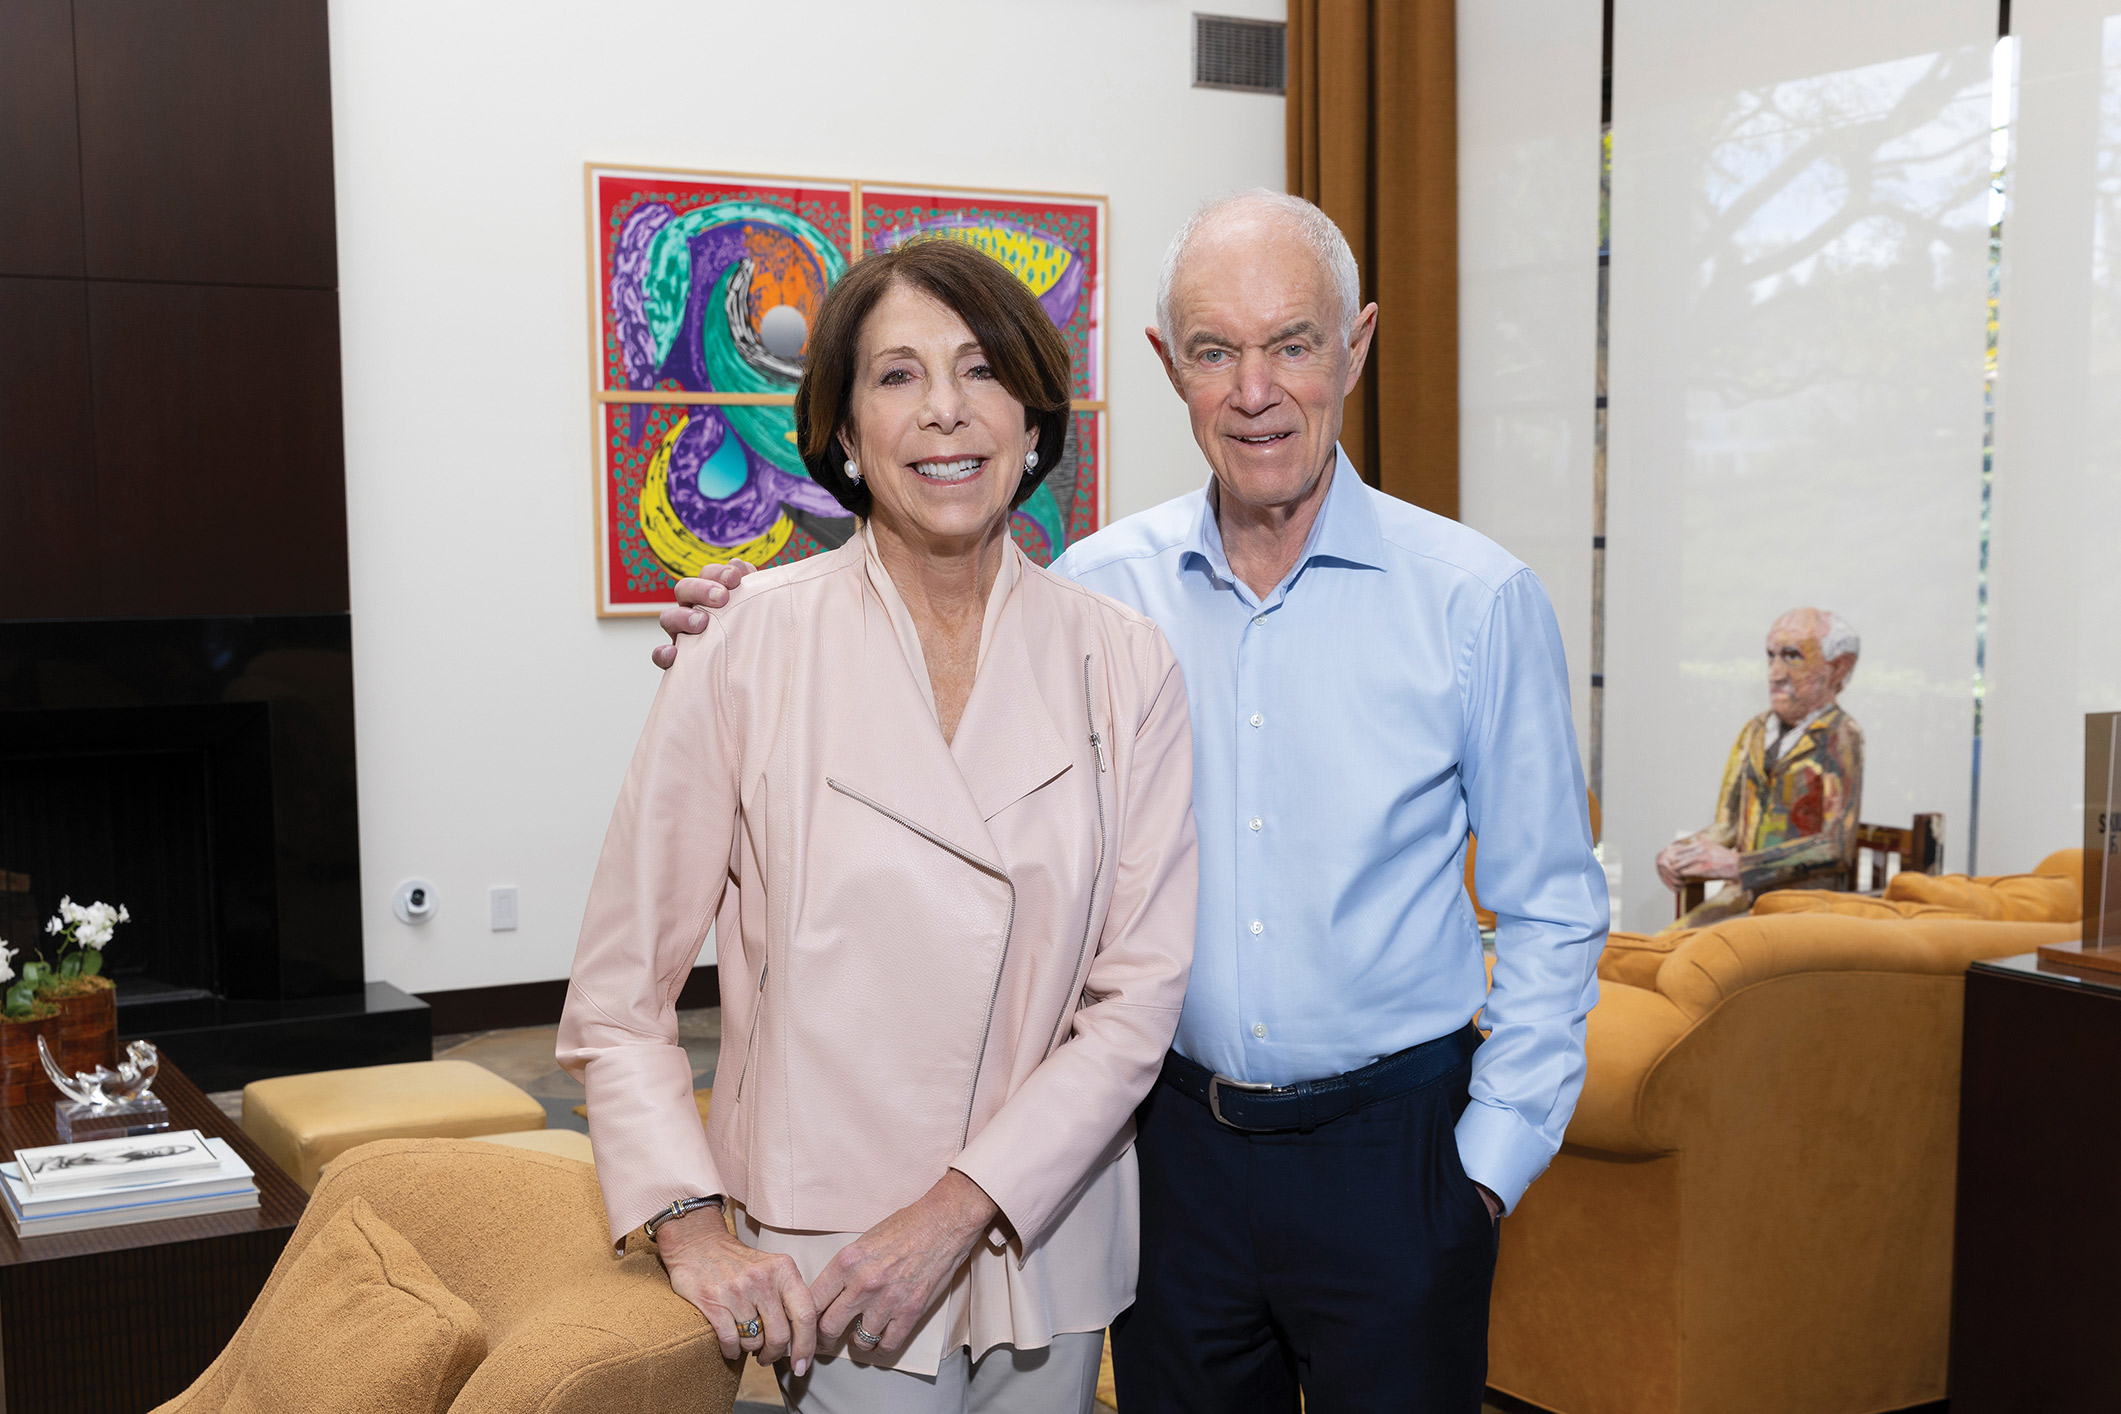 Sue and Ralph Stern stand in a room with a colorful painting in the background.